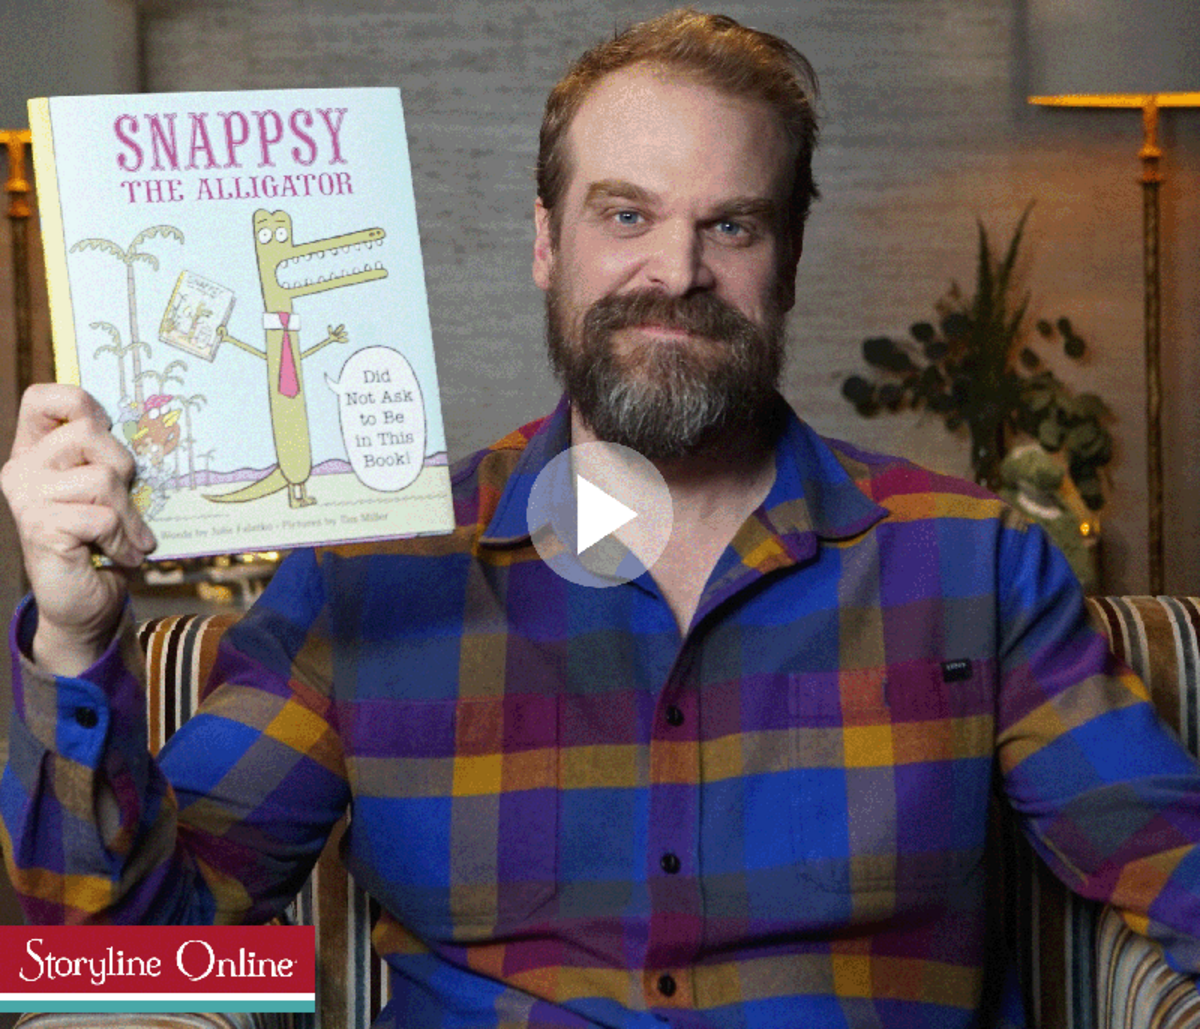 Actor, David Harbour reads “Snappsy the Alligator(Did Not  Ask to Be in This Book)”